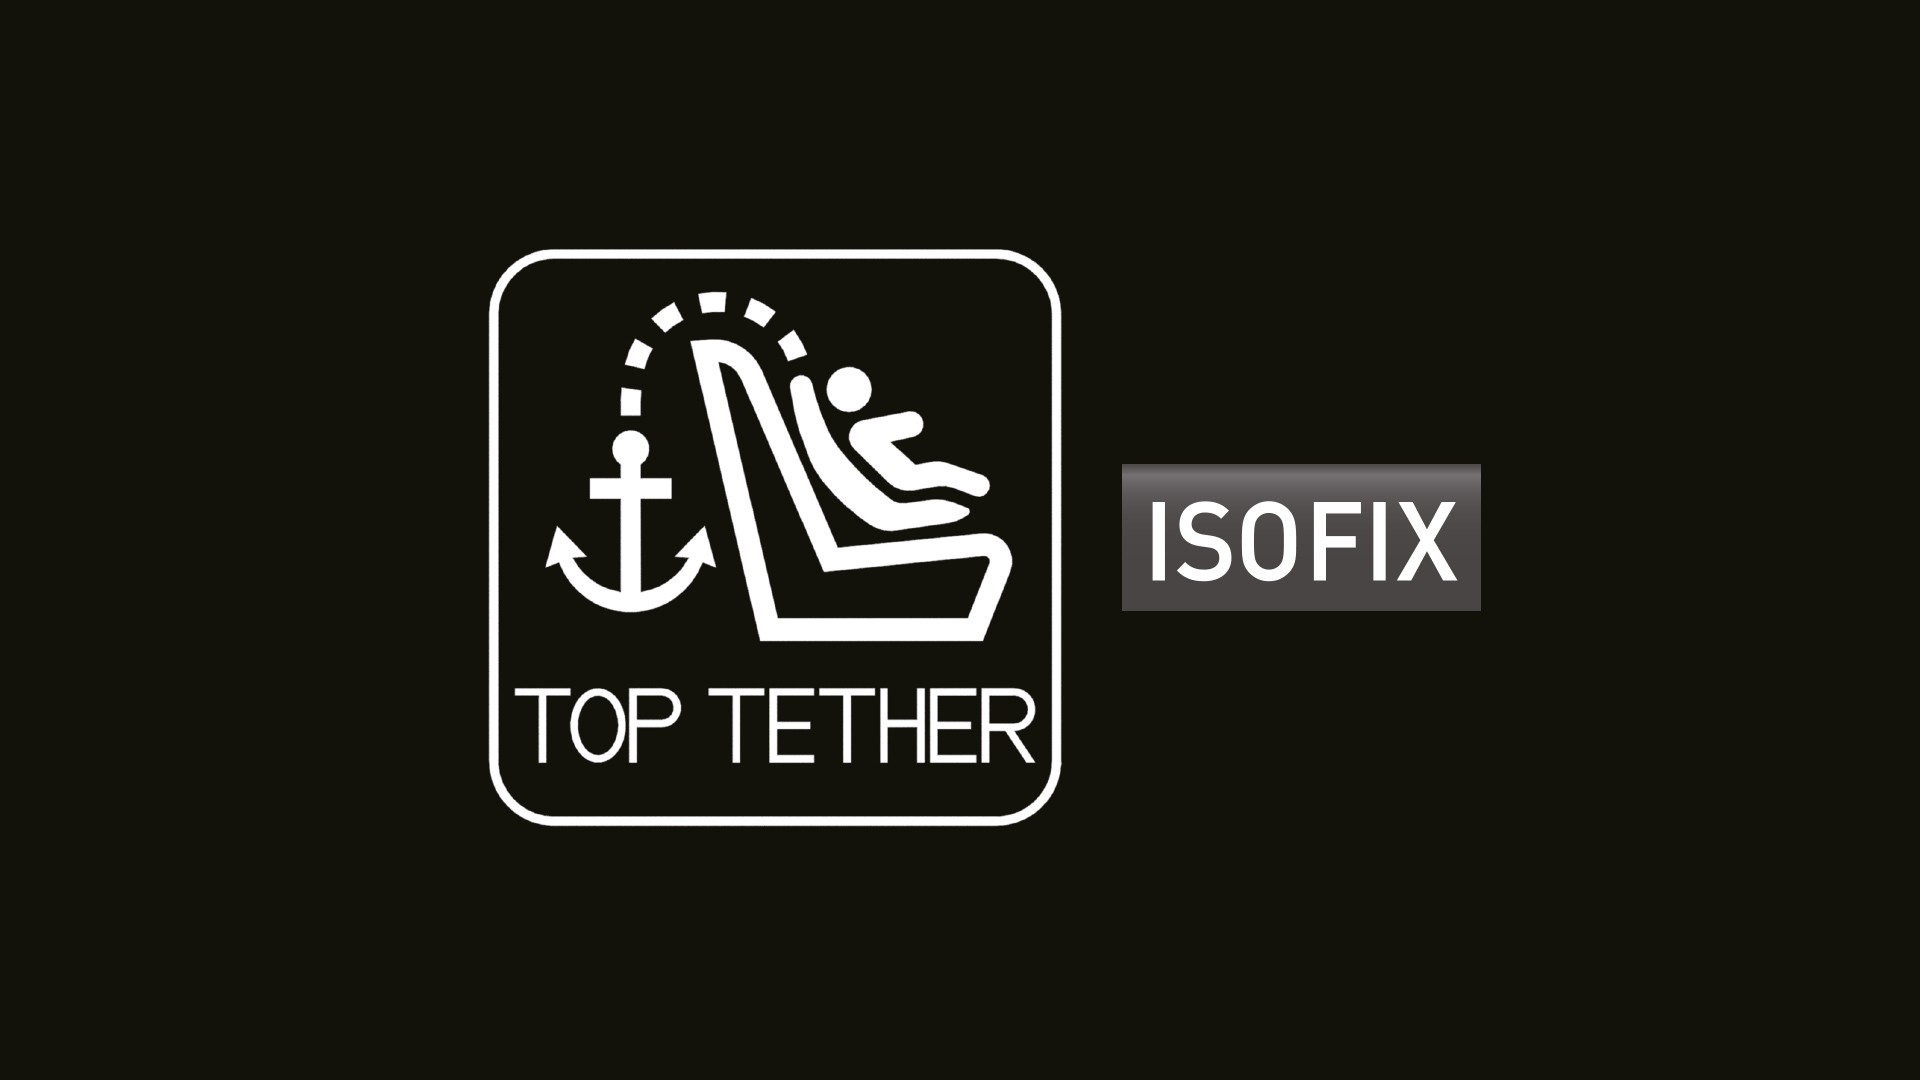 ISOFIX and TOP TETHER